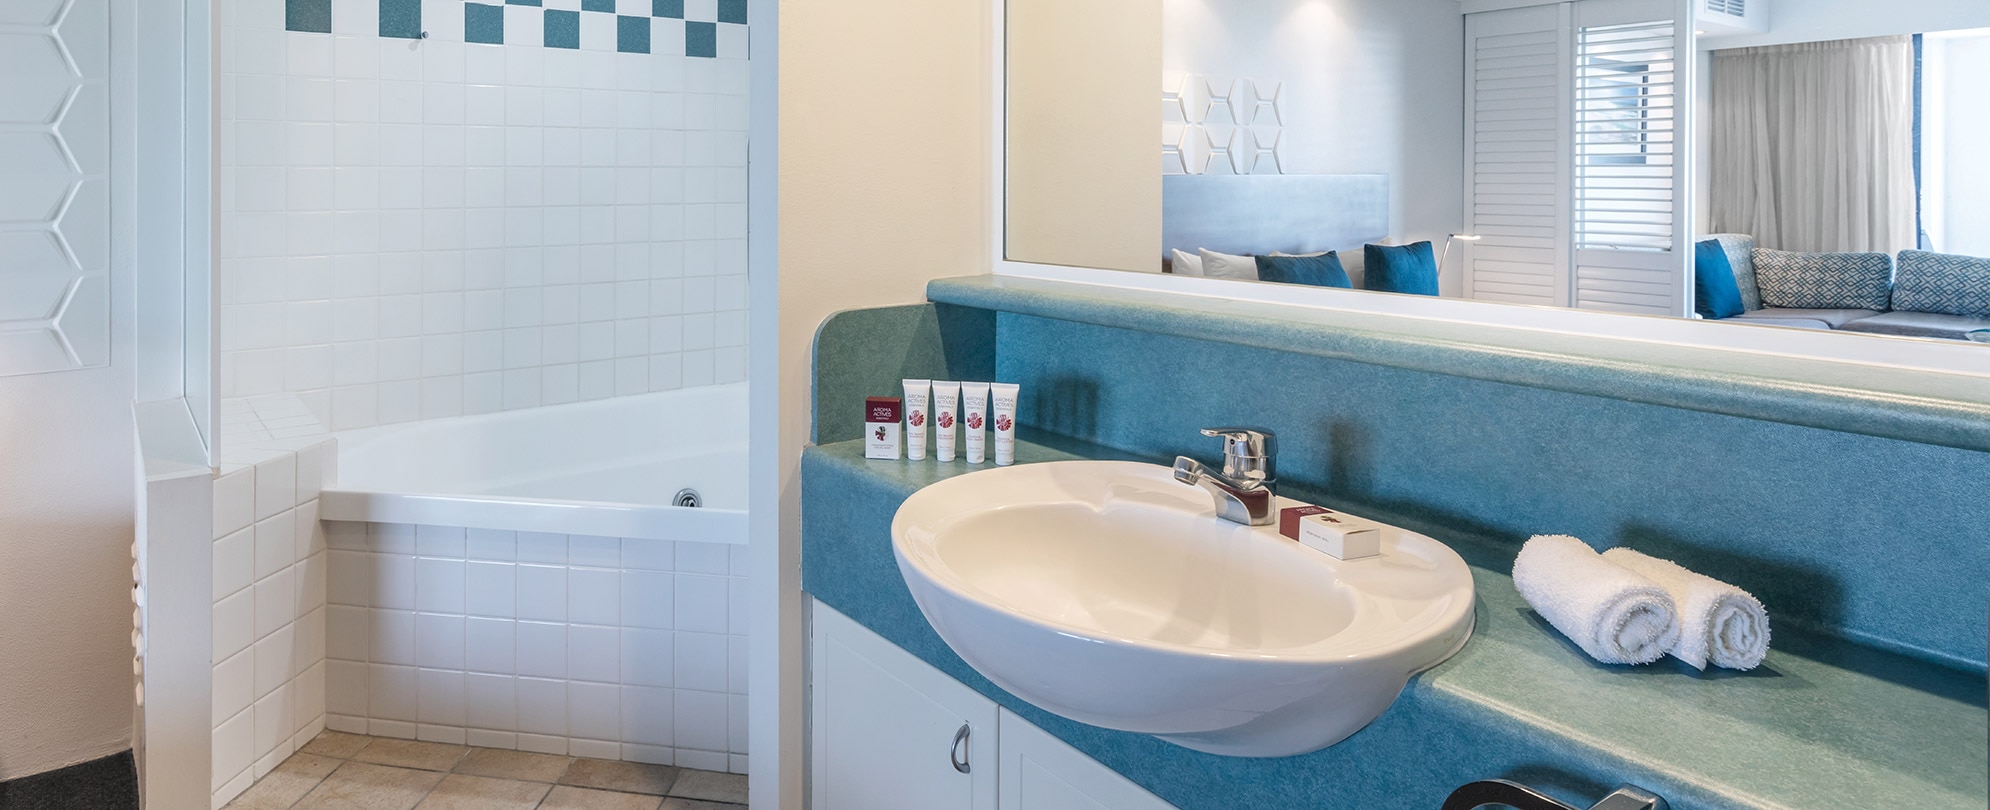 The bathroom sink and tub in a 1-bedroom suite at Club Wyndham Golden Beach.